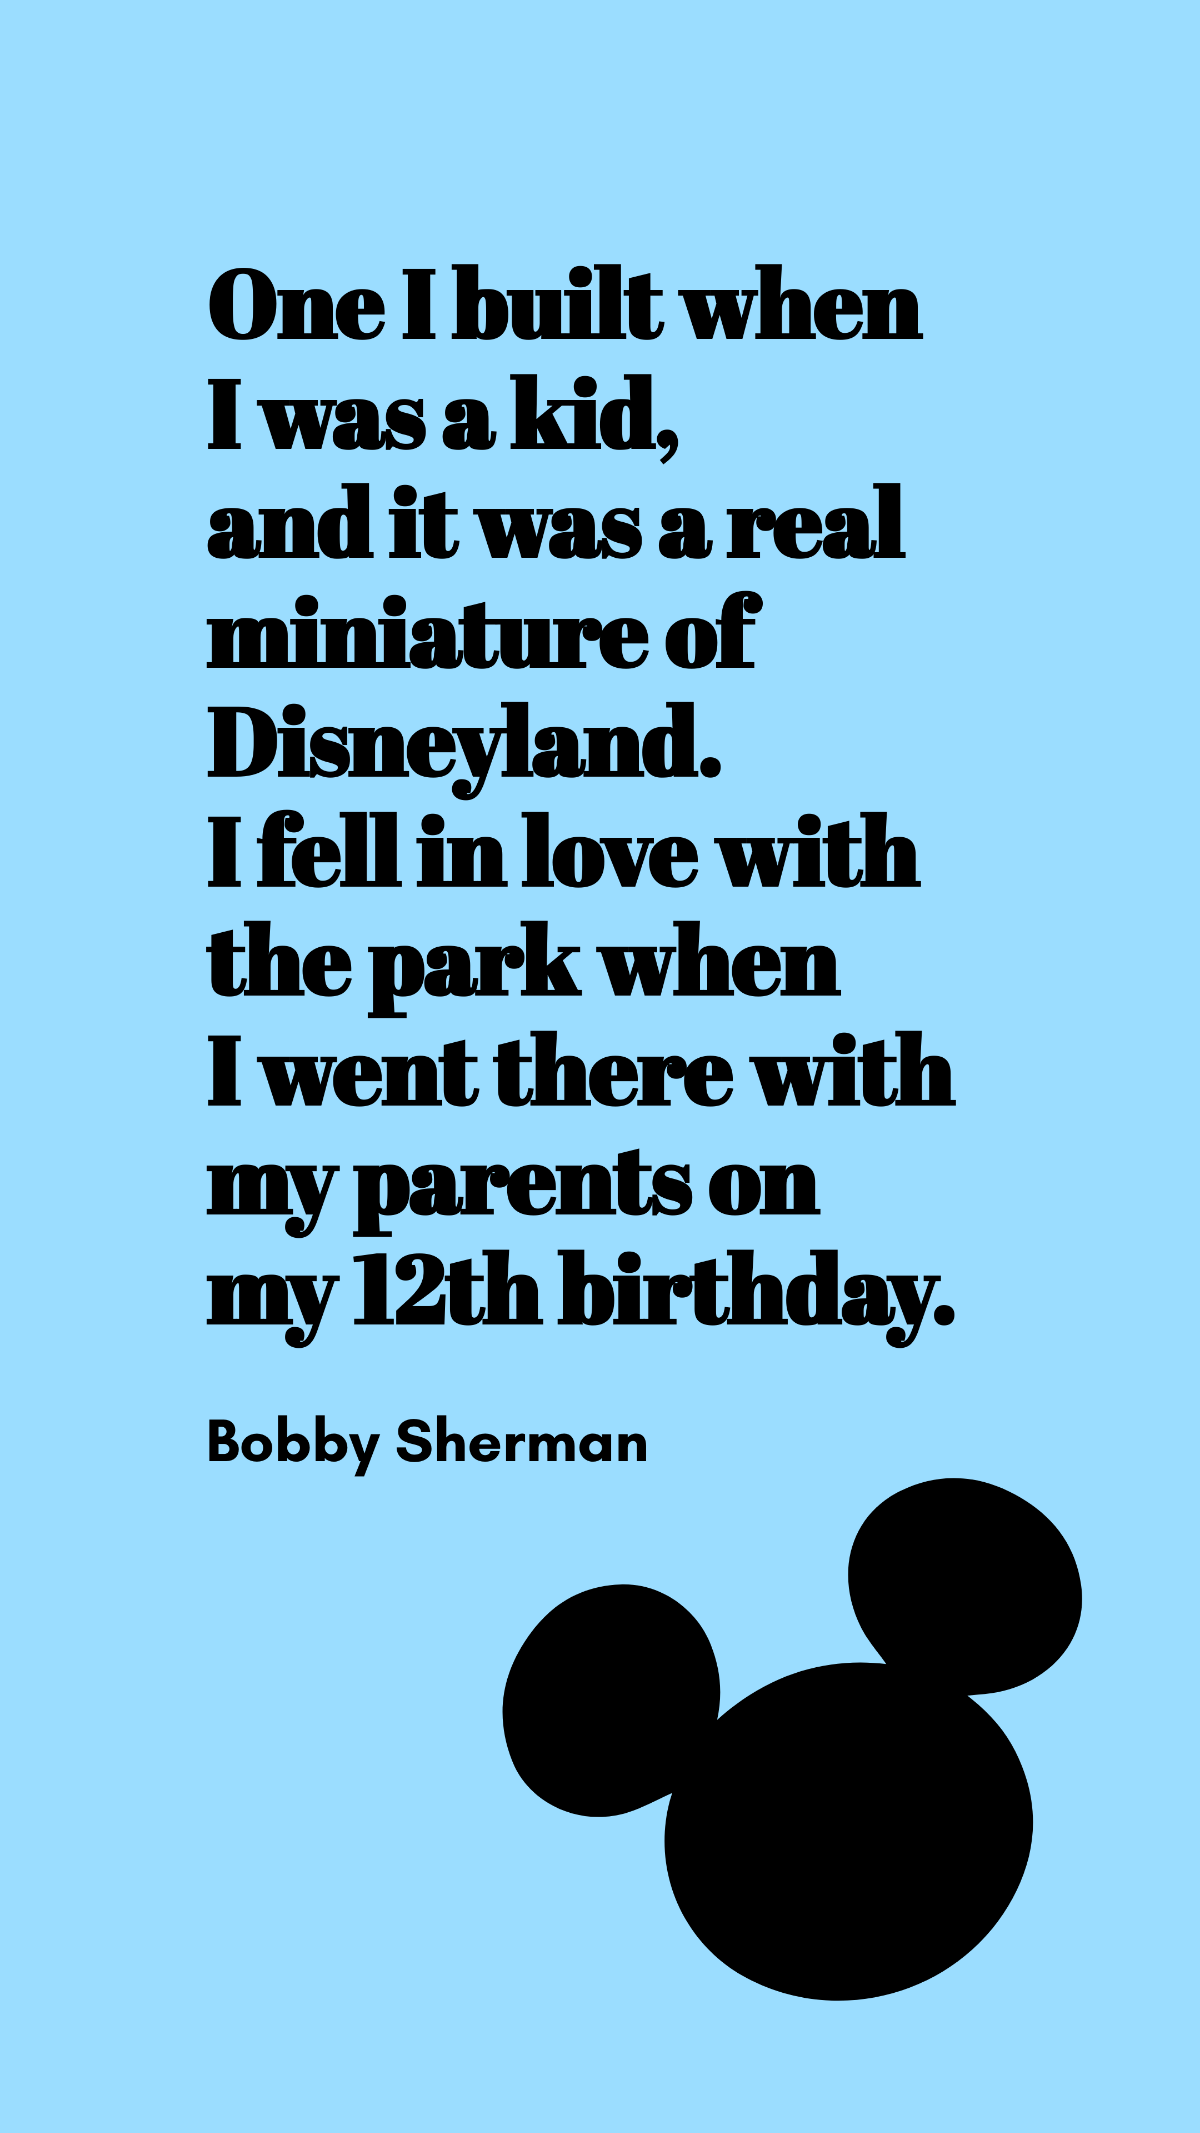 Bobby Sherman - One I built when I was a kid, and it was a real miniature of Disneyland. I fell in love with the park when I went there with my parents on my 12th birthday. Template